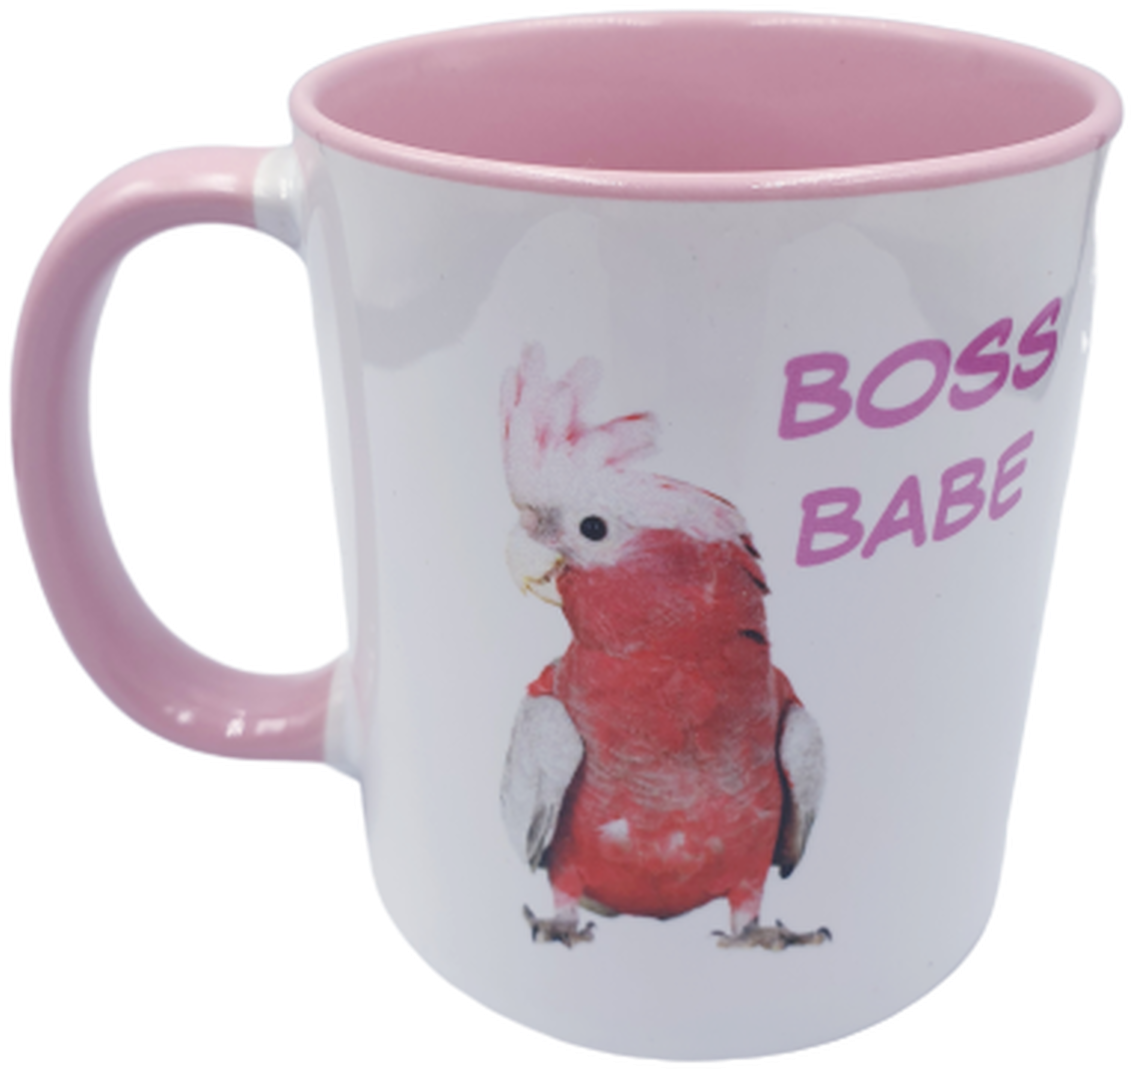 A White And Pink Mug With A Bird On It